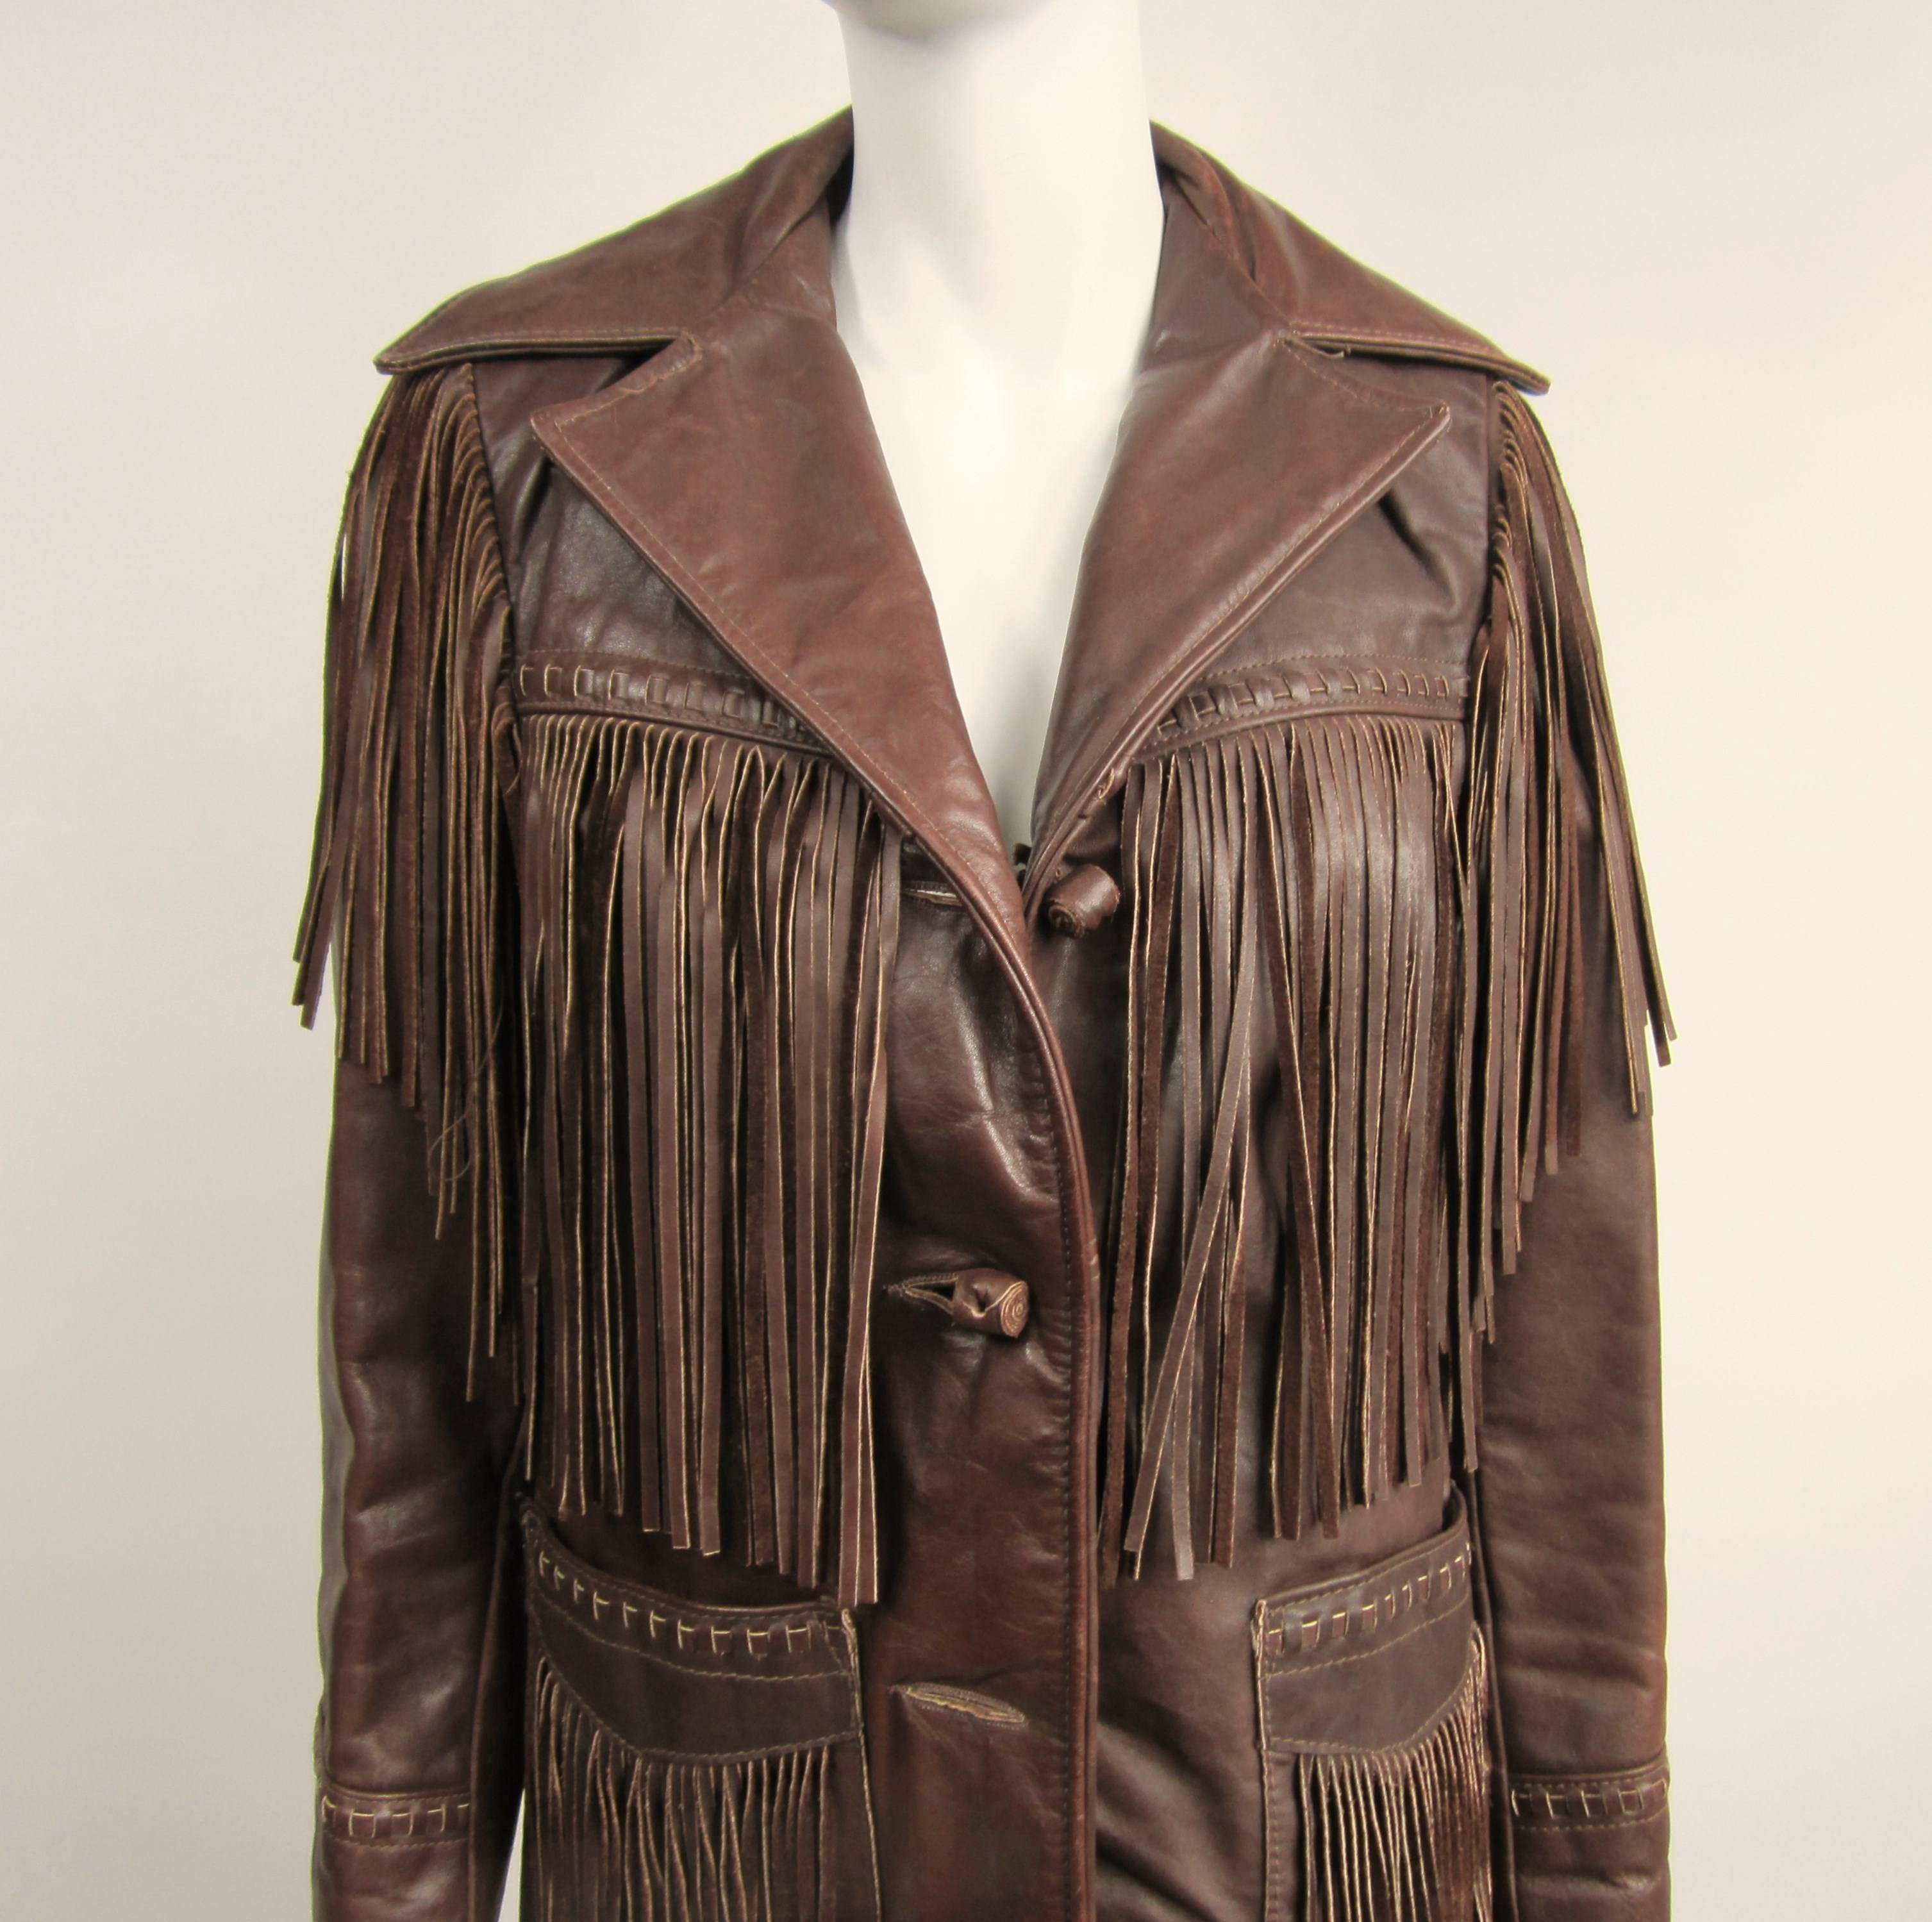   SCHOTT Leather Fringe Biker Jacket / Distressed. Dark Brown In color with Fringe all over this Vintage Leather Jacket. Pockets, Beast, Arm, Back all have fringe. Throw on a pair of Cowboy Boots and you are ready to go. 3 rolled leather buttons on